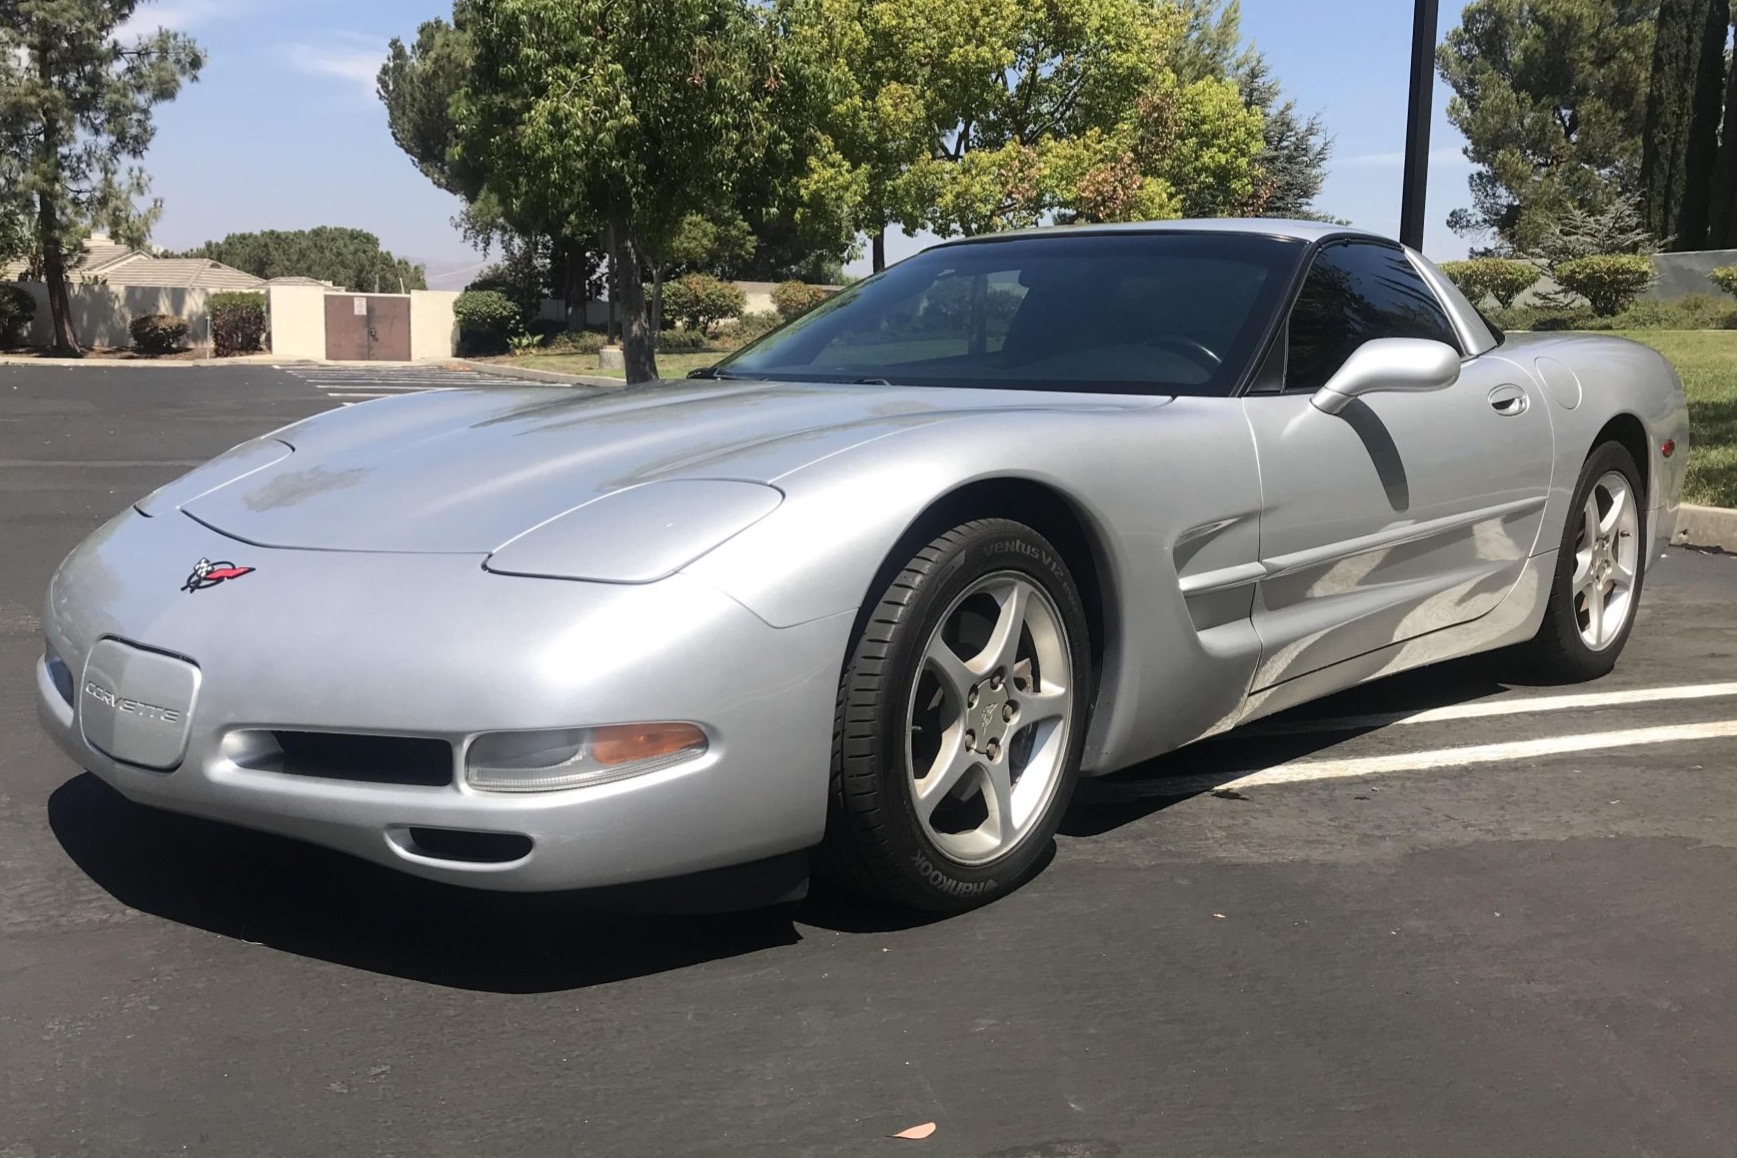 Used 2001 Chevrolet Corvette Coupe Review